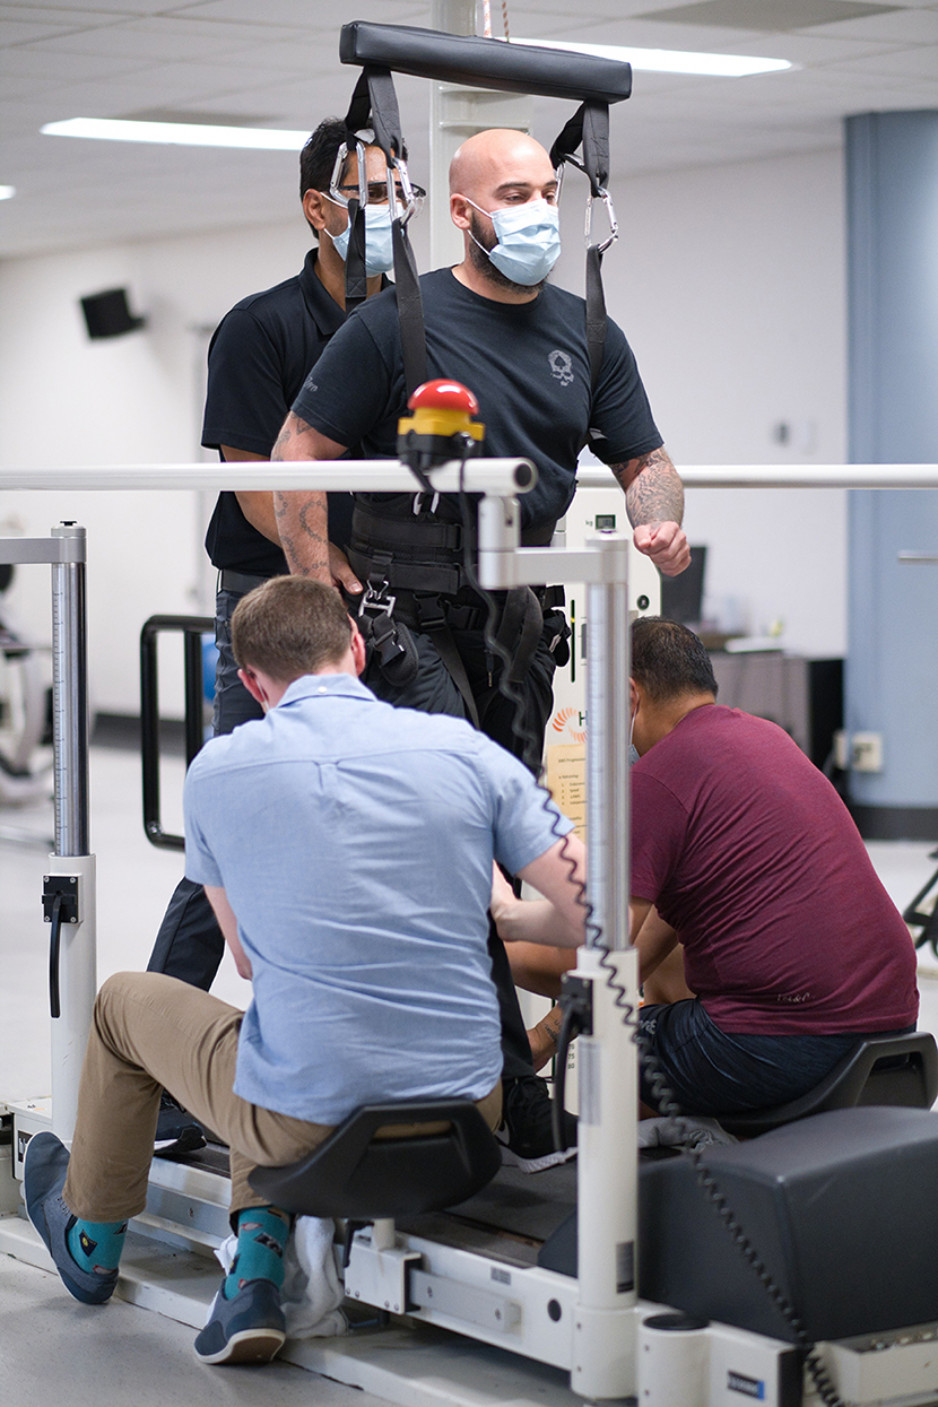 A masked man in a harness attached to the ceiling stands on a treadmill, as two men whose backs are to the camera crouch in front of him adjusting the device on him 